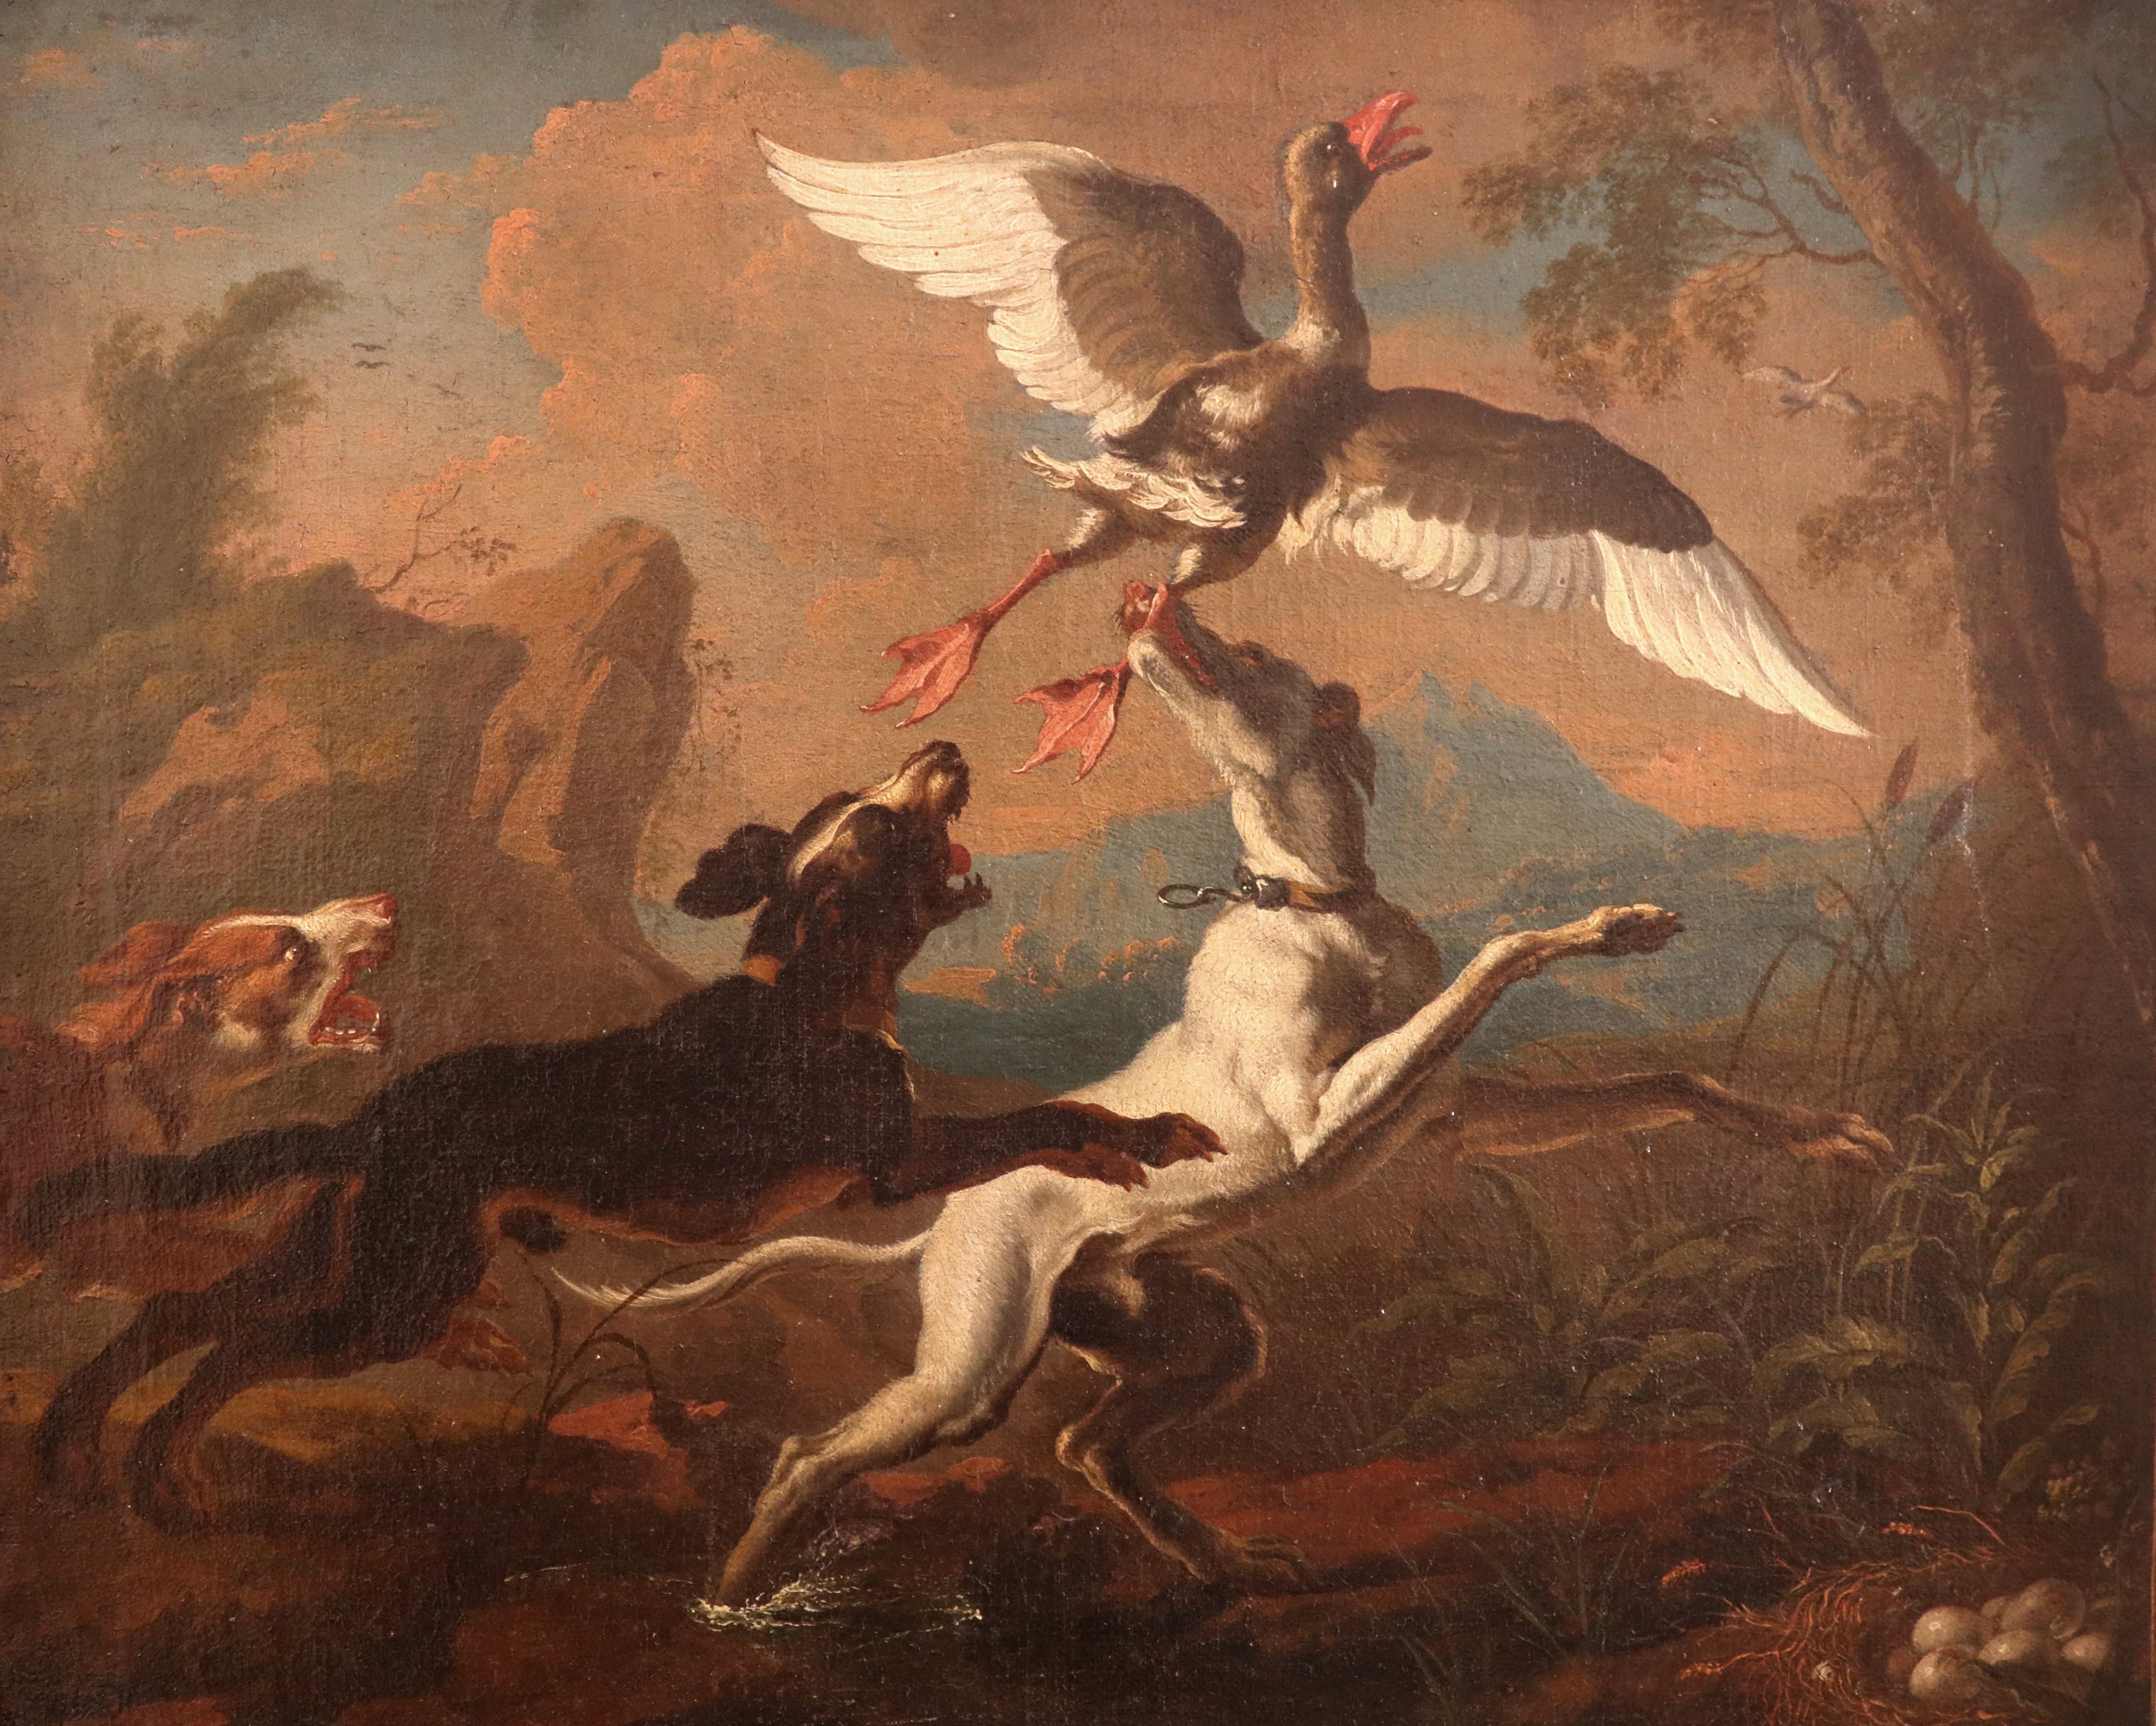 (2)Hounds putting up a nesting swan; Hounds capturing a nesting goose by Abraham Hondius